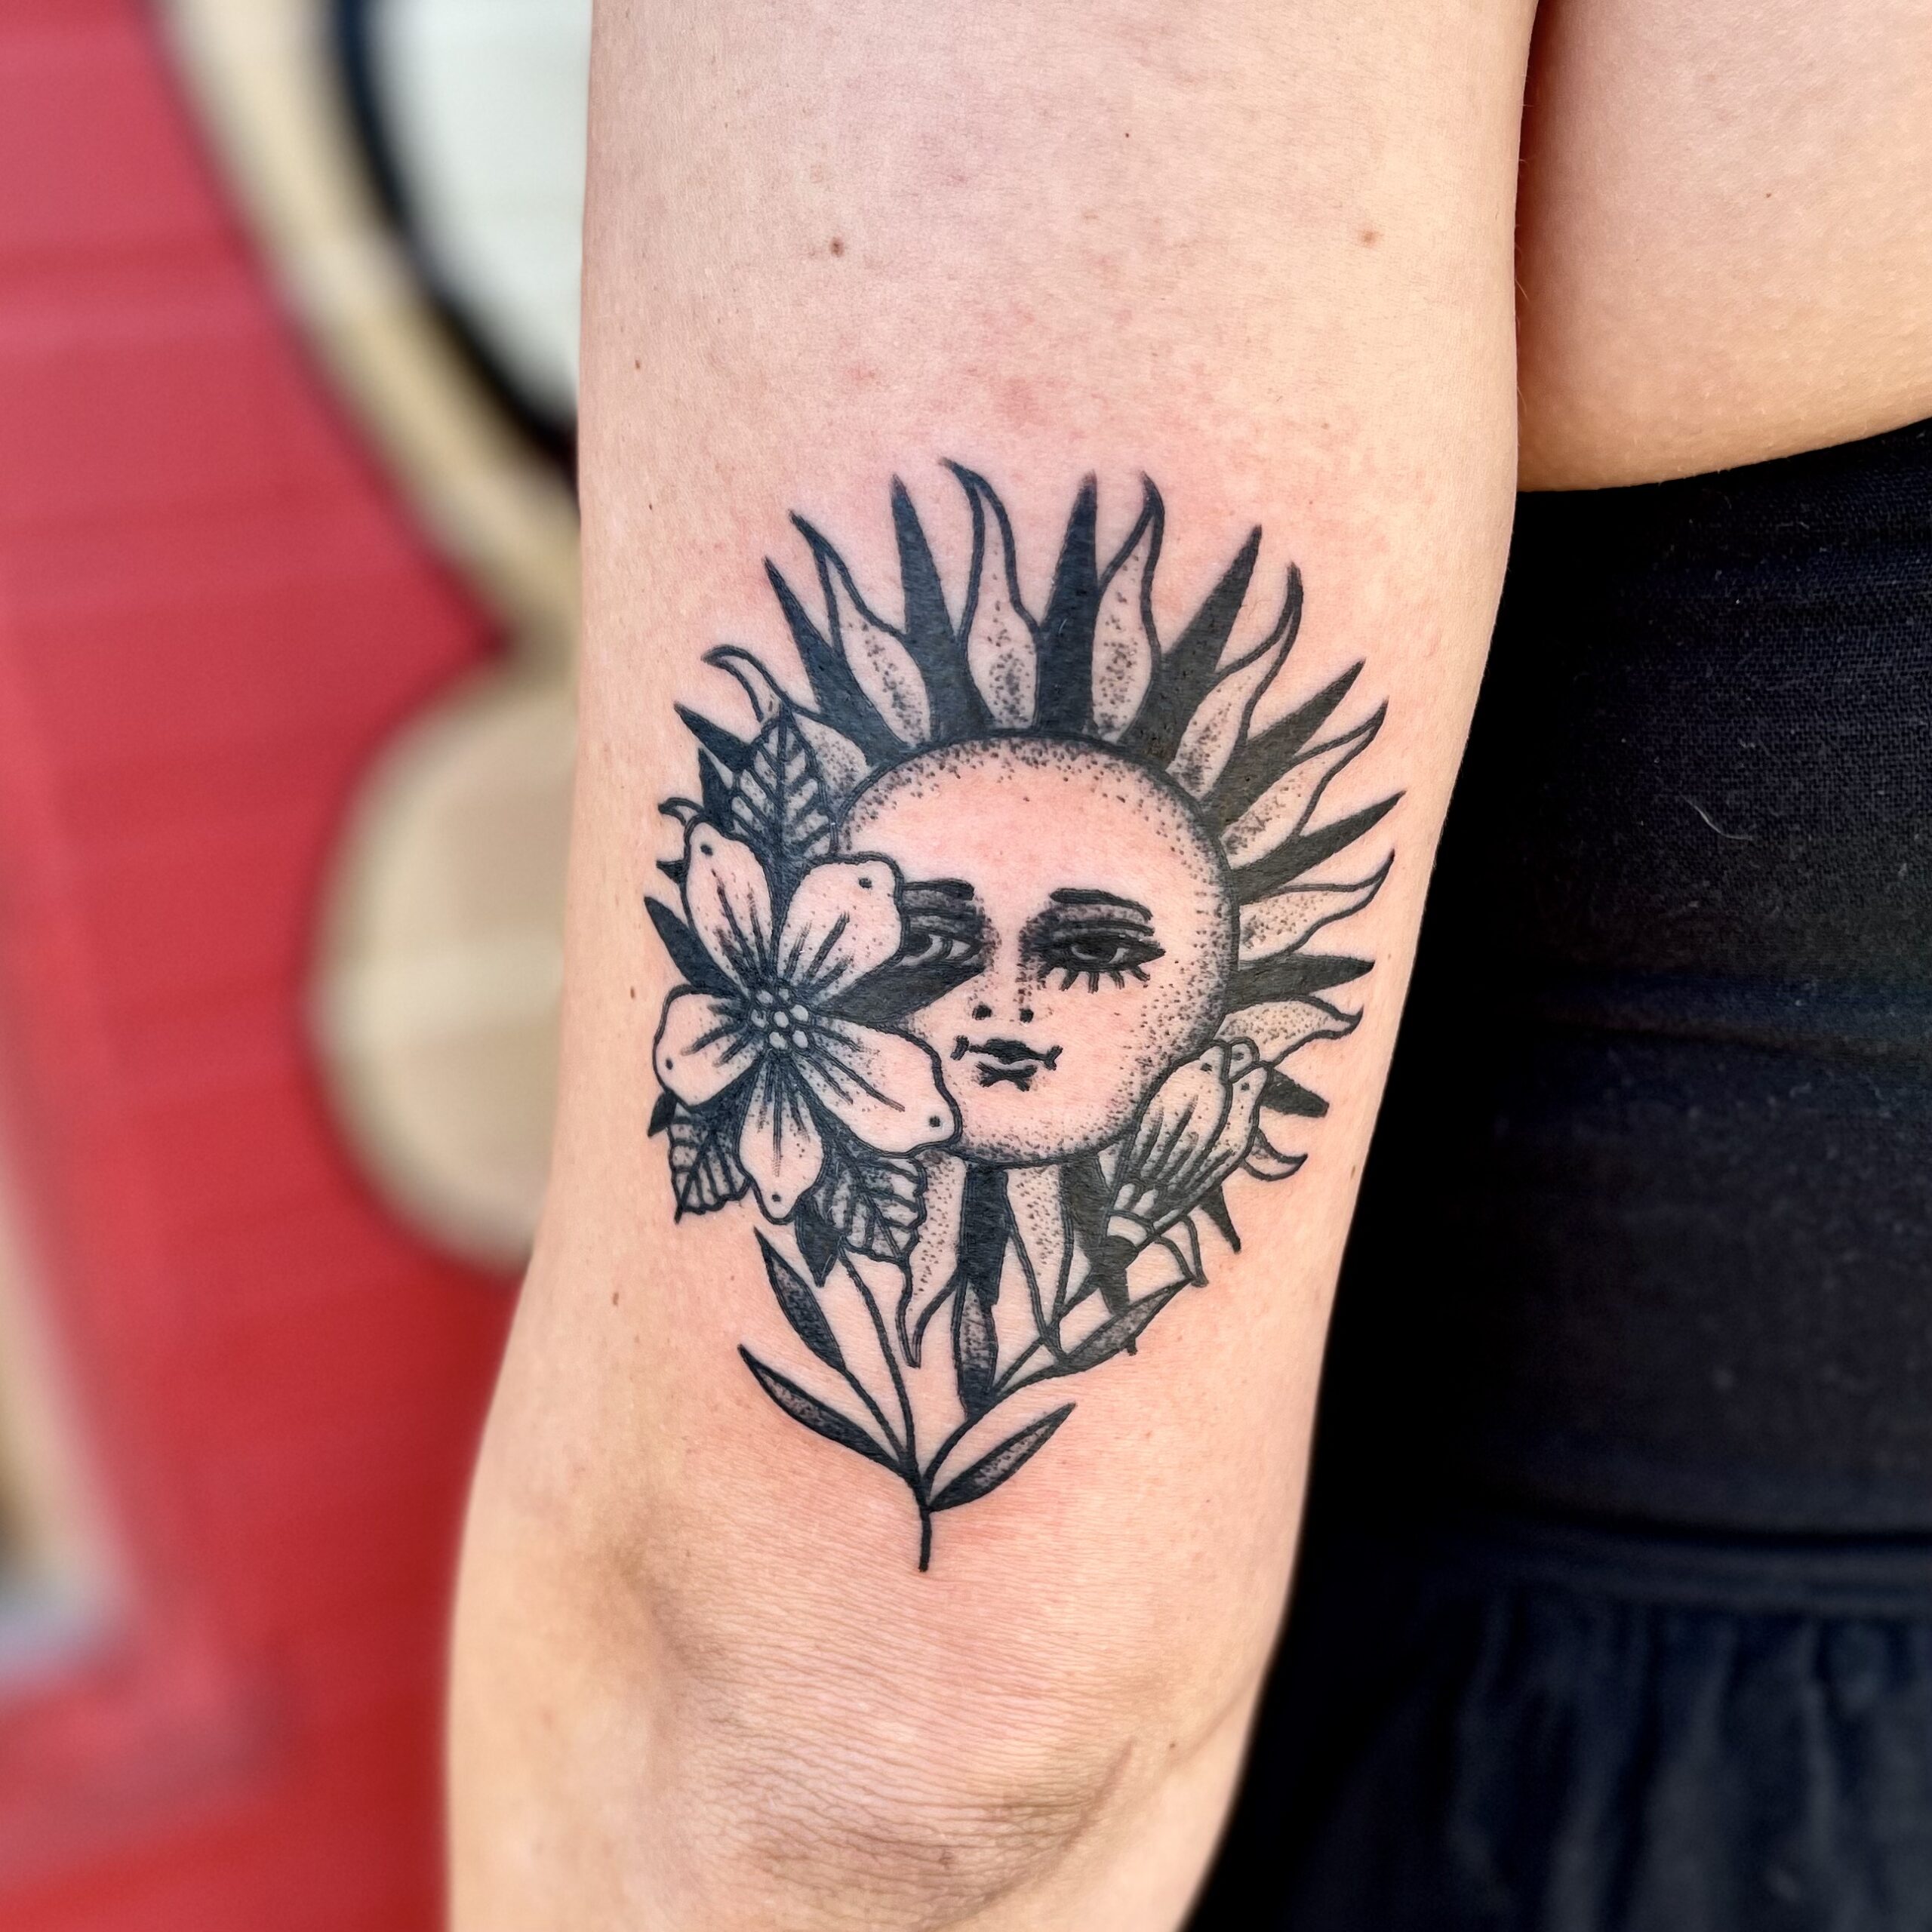 Tattoo of a flower and a sun on a woman's arm from best tattoo shops in dallas